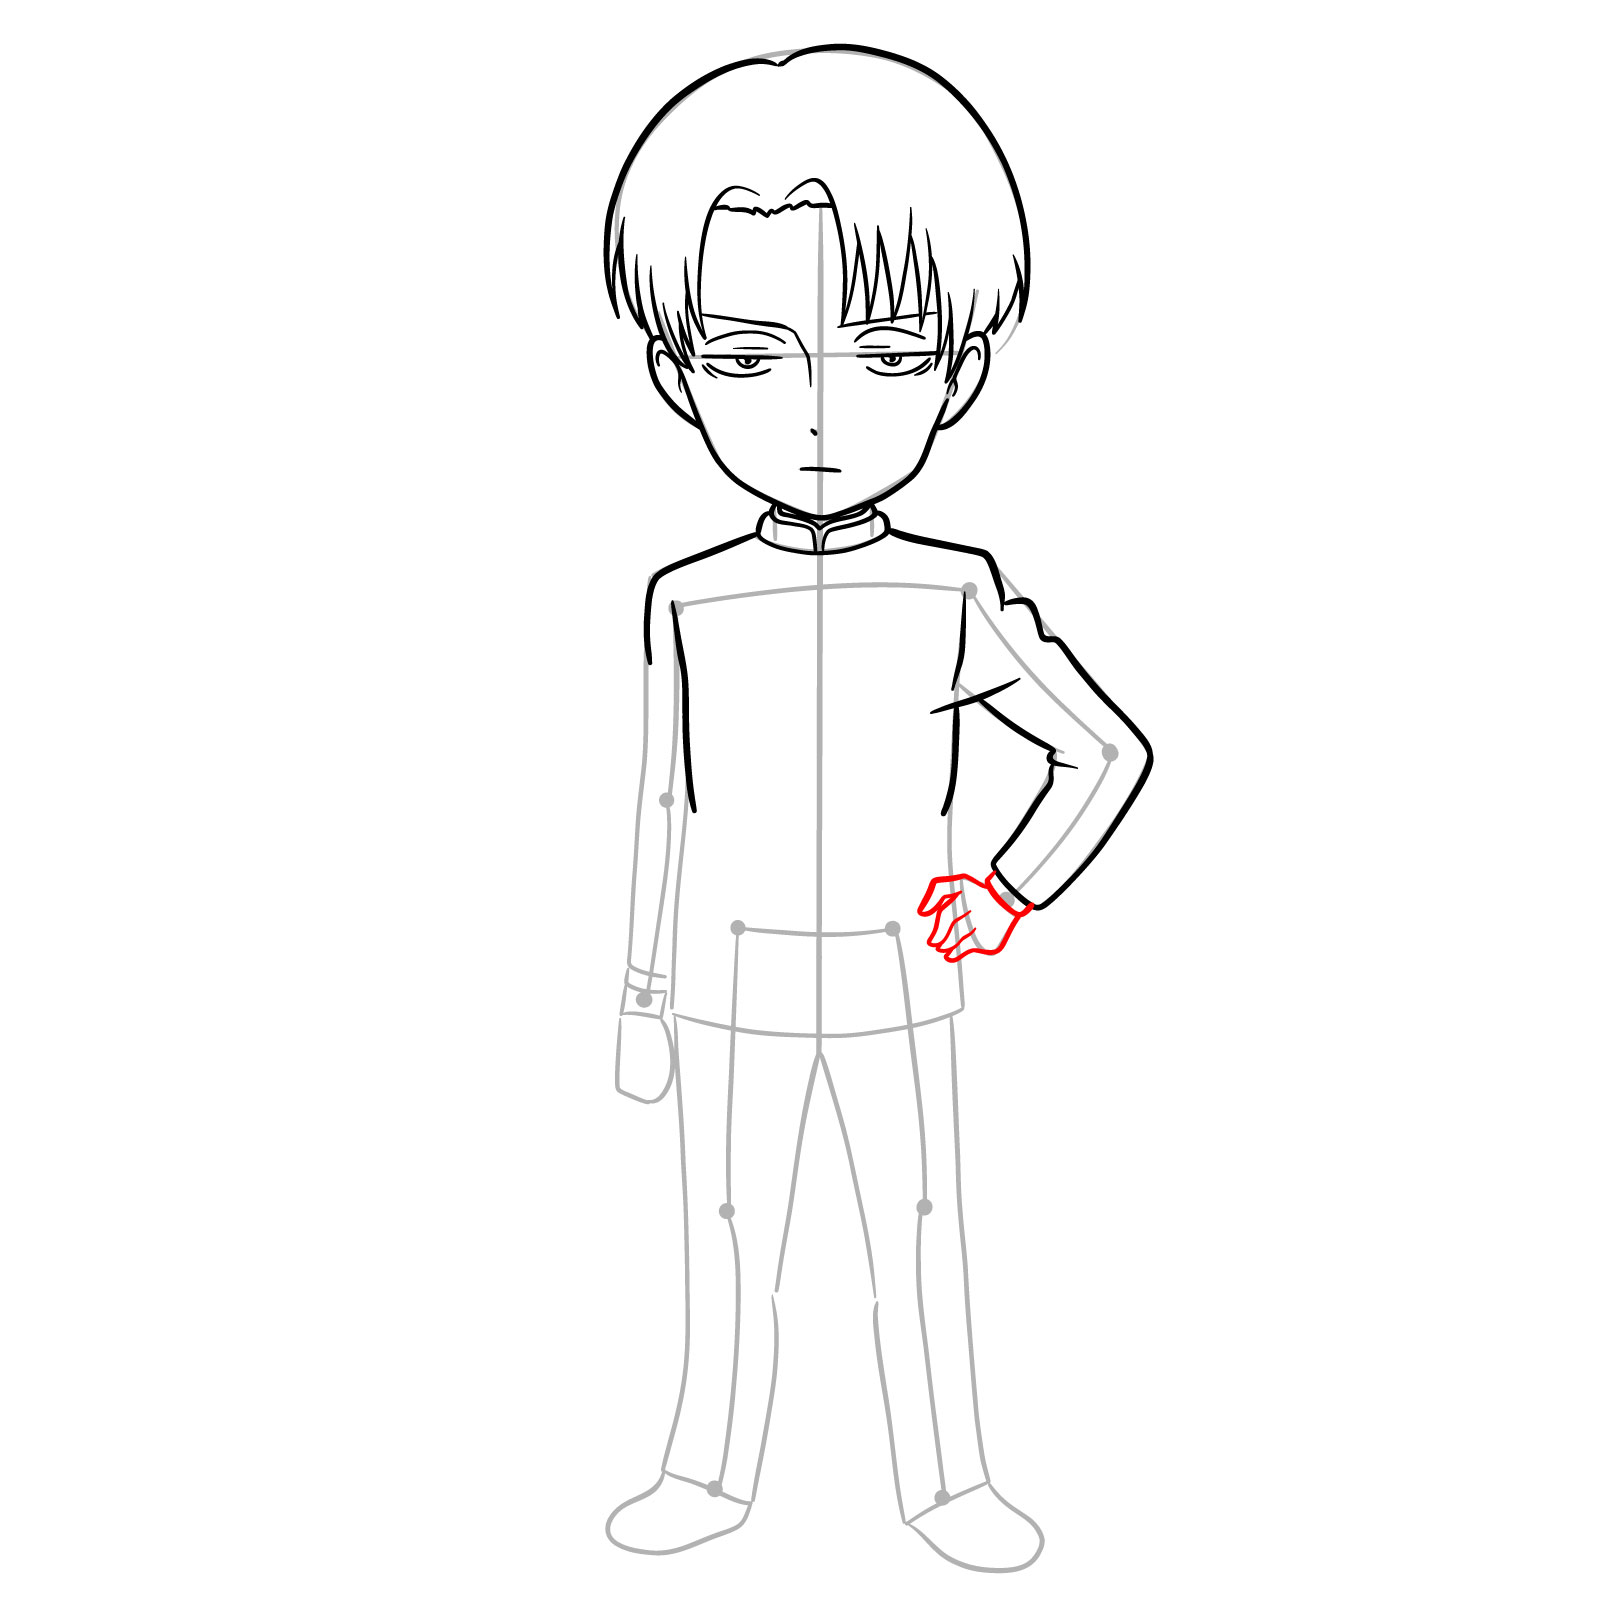 Chibi Levi's hand on the hip sketched out in the drawing guide - step 12